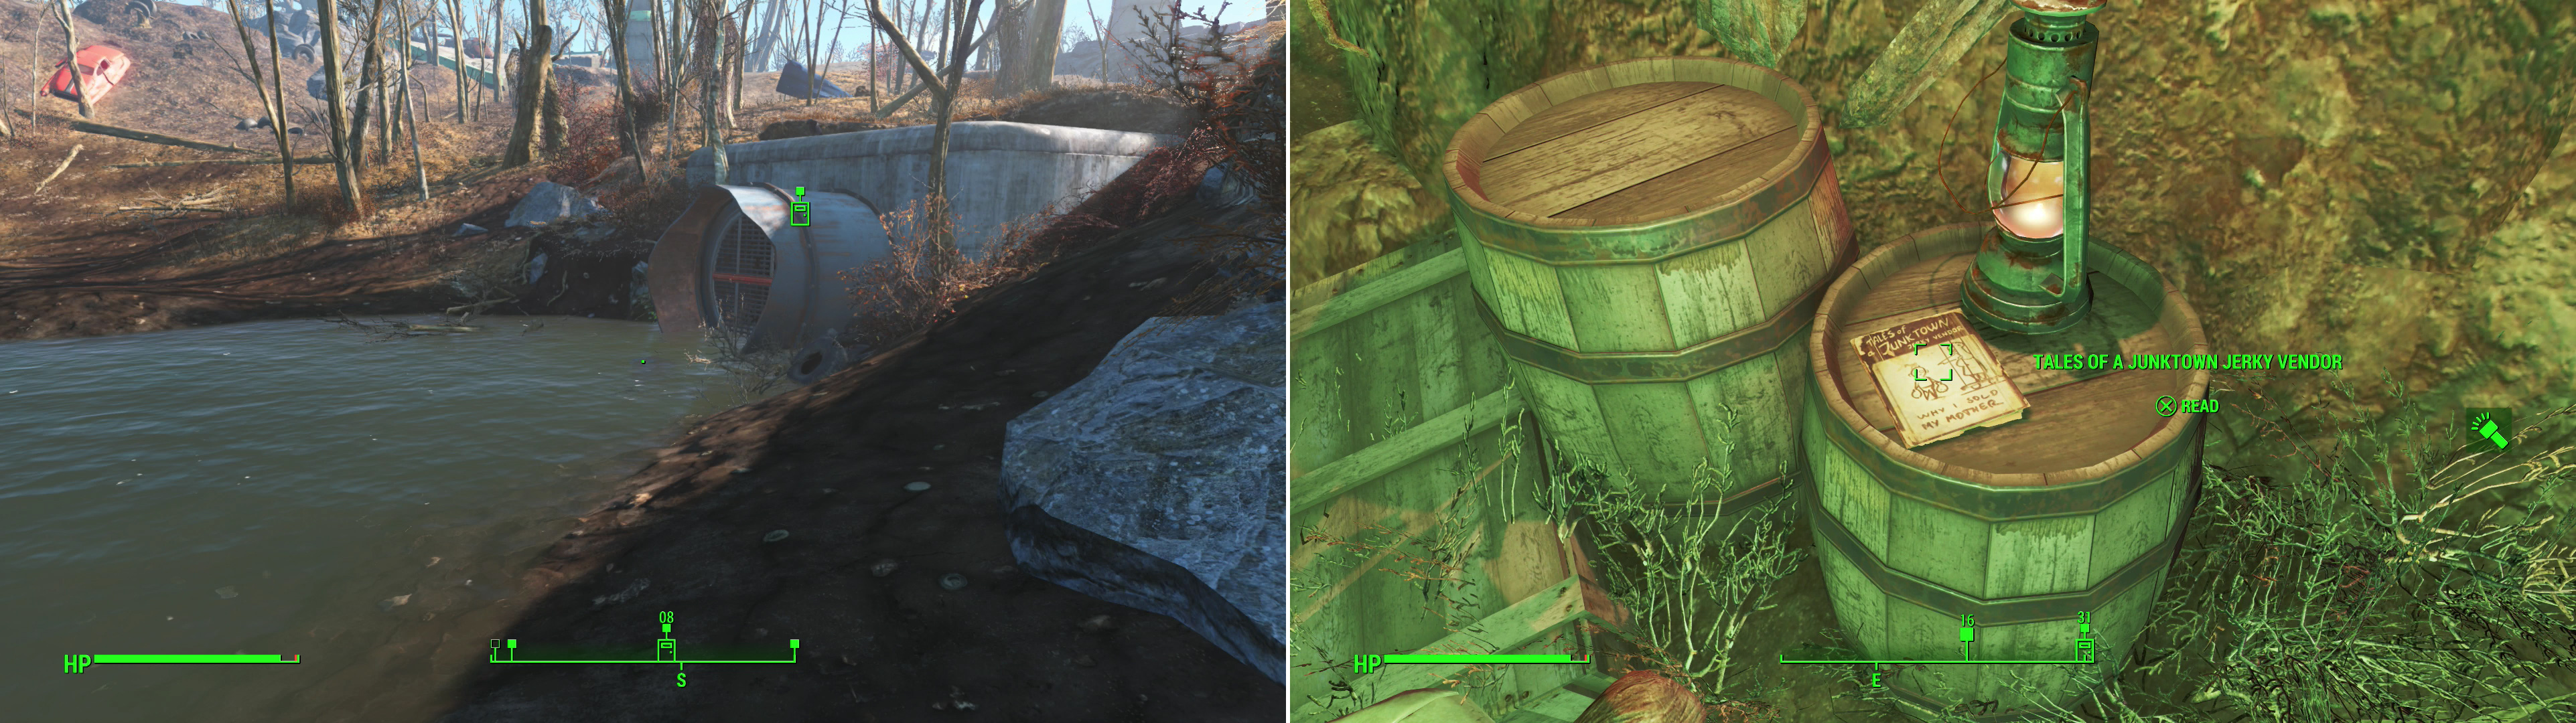 Find a drainage pipe near Walden Pond (left) which leads to a Raider Den. Inside you’ll find a Tale of a Junktown Jerky Vendor magazine (right).